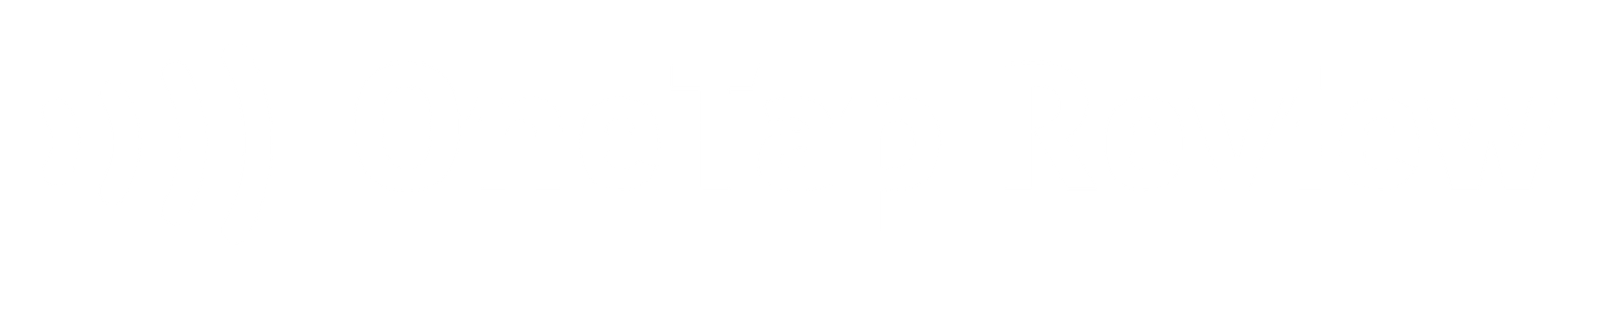 OneTap Review